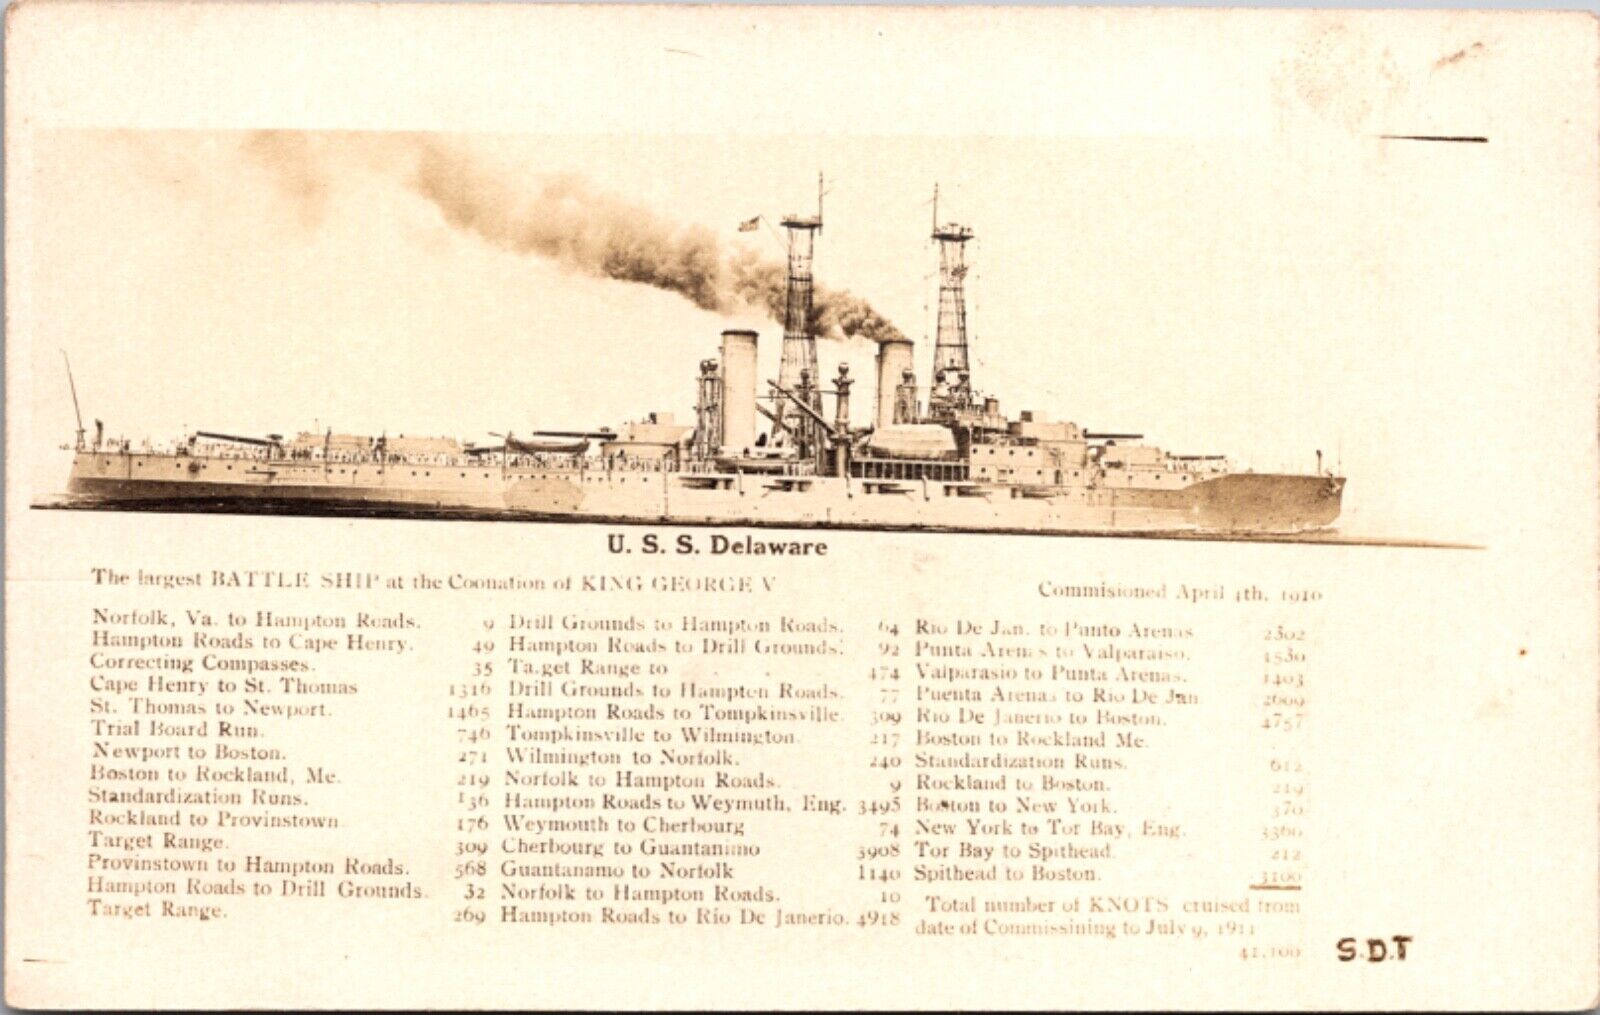 Real Photo Postcard U.S.S. Delaware Commissioned April 4th 1910